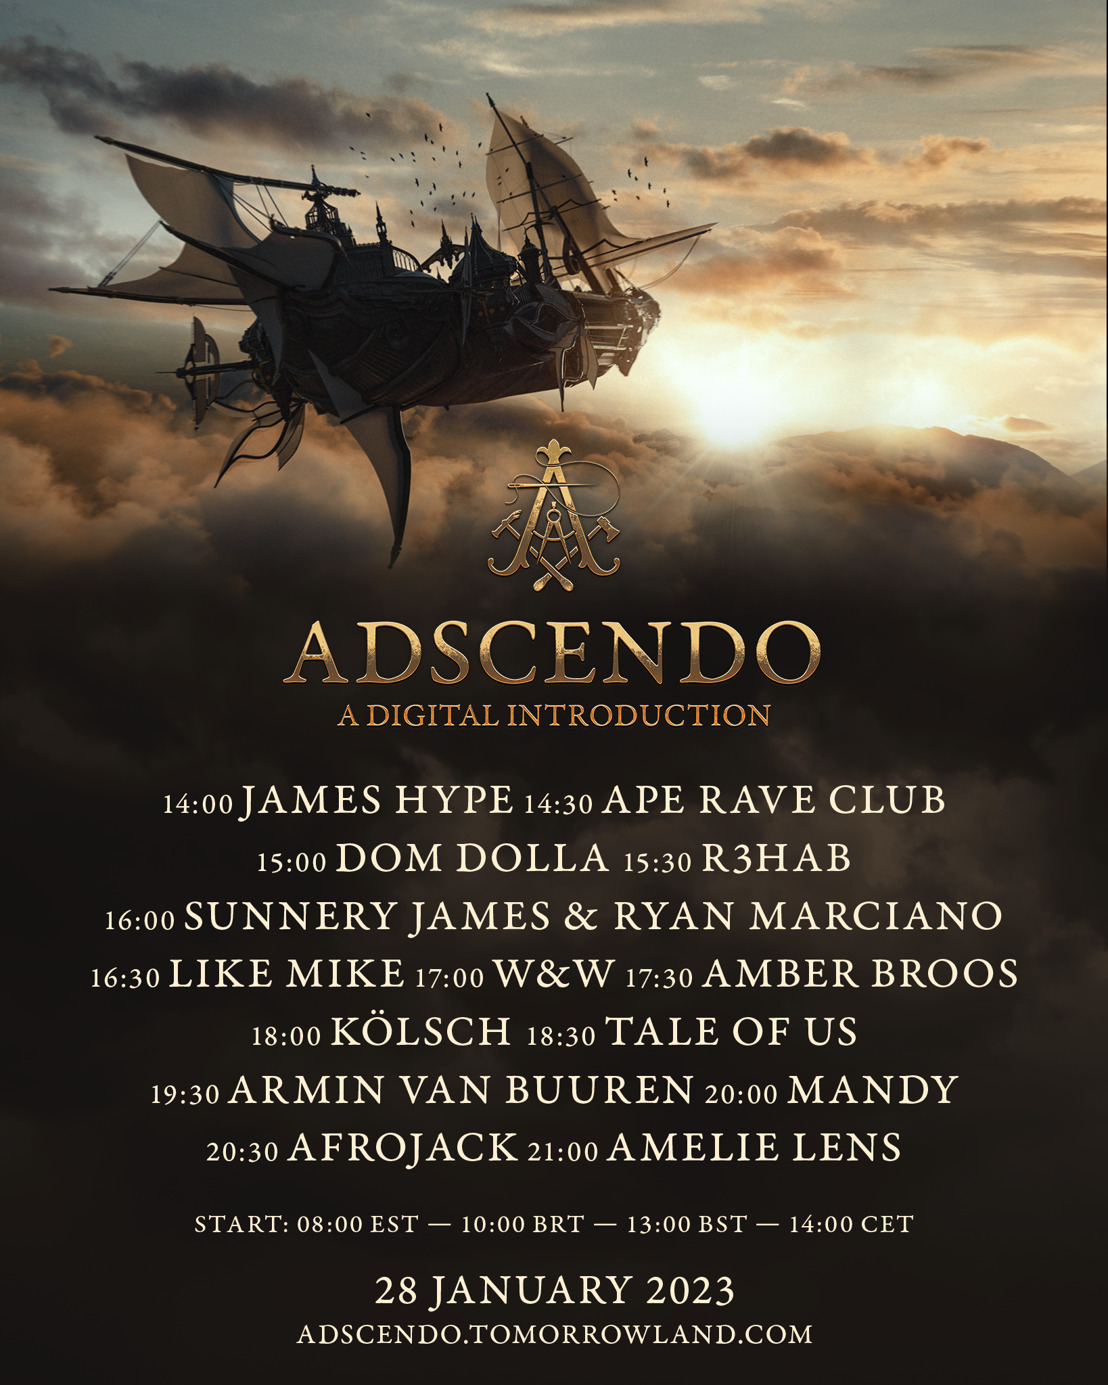 Discover the full line-up of Tomorrowland Belgium 2023 on Saturday January 28 during ‘Adscendo – A Digital Introduction’